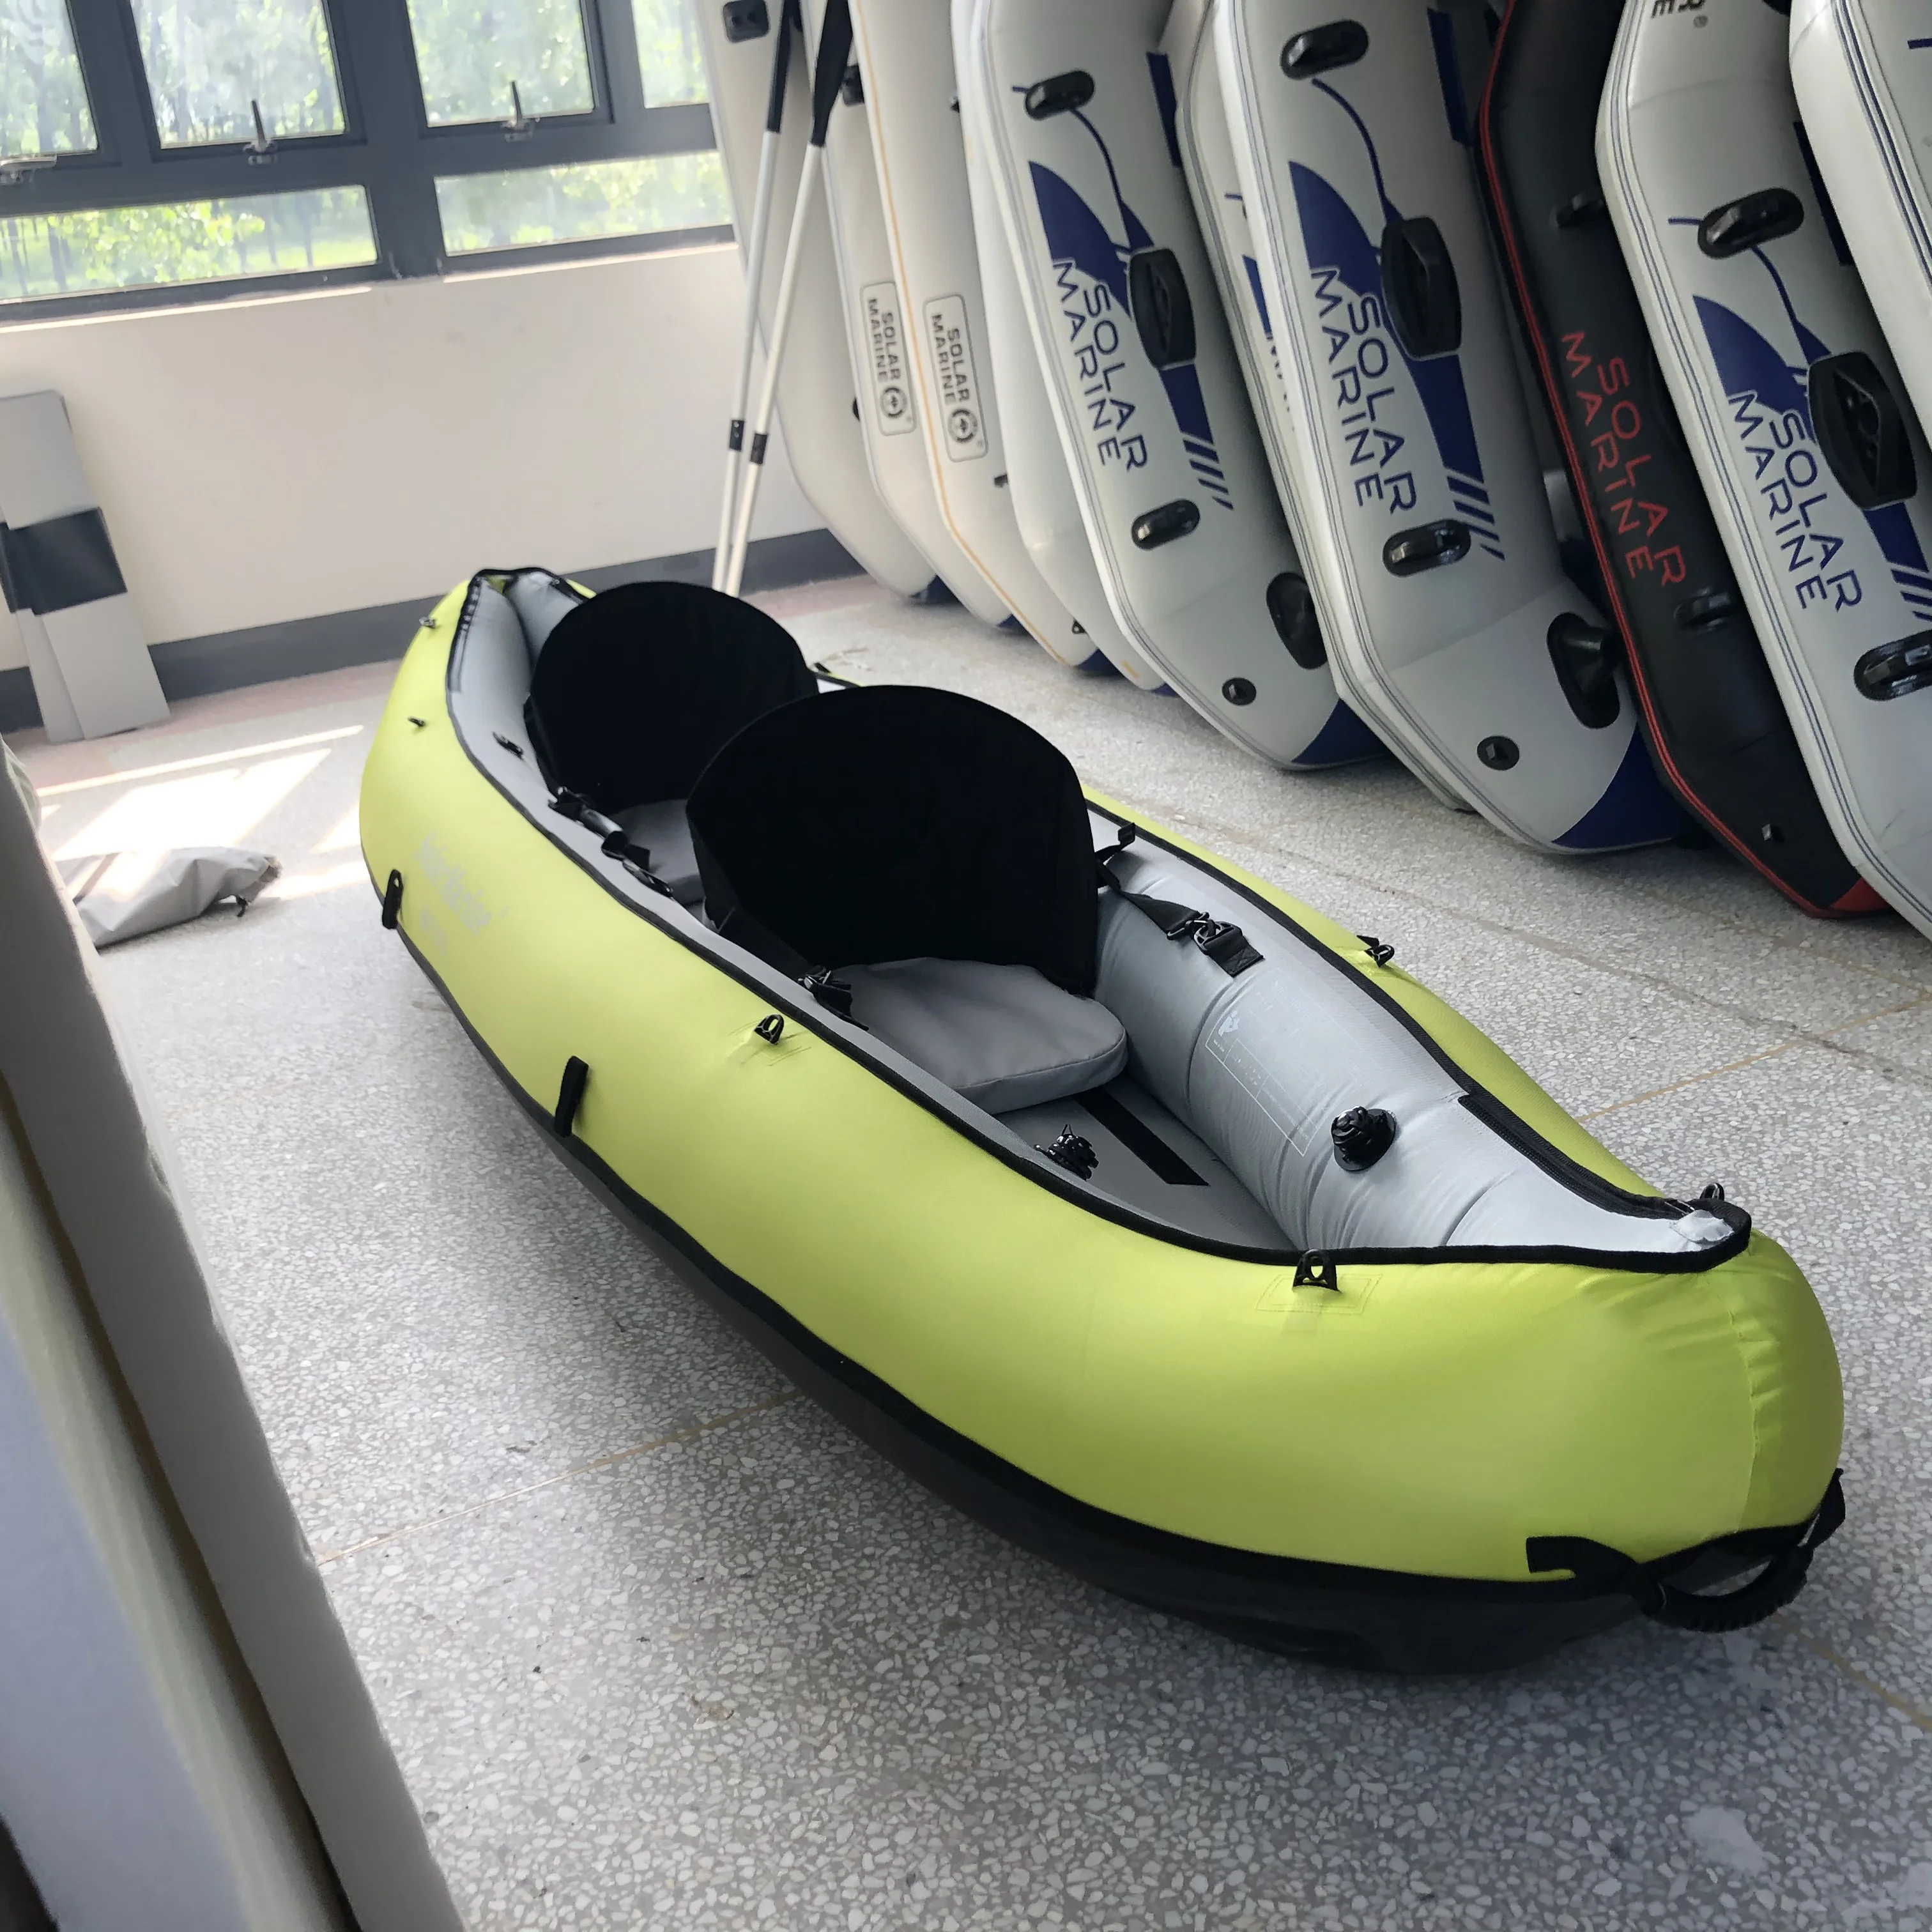 https://ae01.alicdn.com/kf/Hca0ea638a20e40b284b69b6504cc41254/Solar-Marine-330cm-Inflatable-Kayak-Fishing-Boat-Portable-Water-Sport-Swimming-Pool-Canoe-With-Paddle-Pump.png